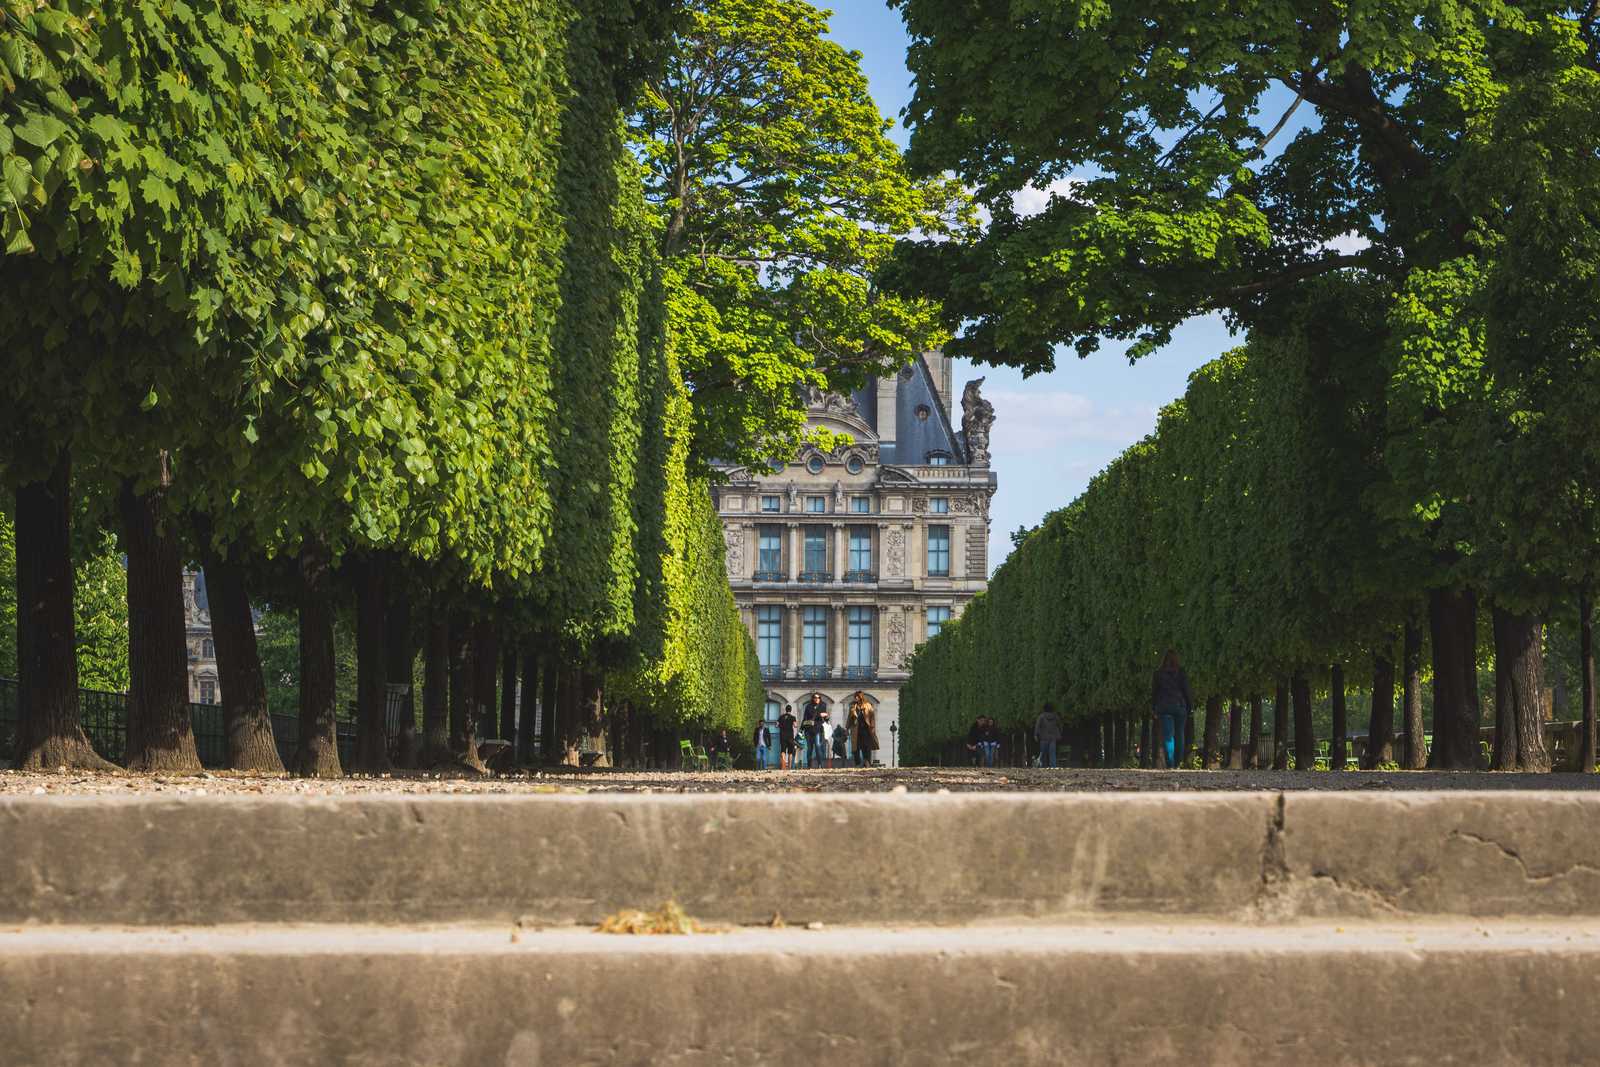 A neatly paved path lined by tightly trimmed, very tall, and deep green hedges leads directly to a view of the Louvre, a massive palace with multi-story windows and dramatic stone architecture